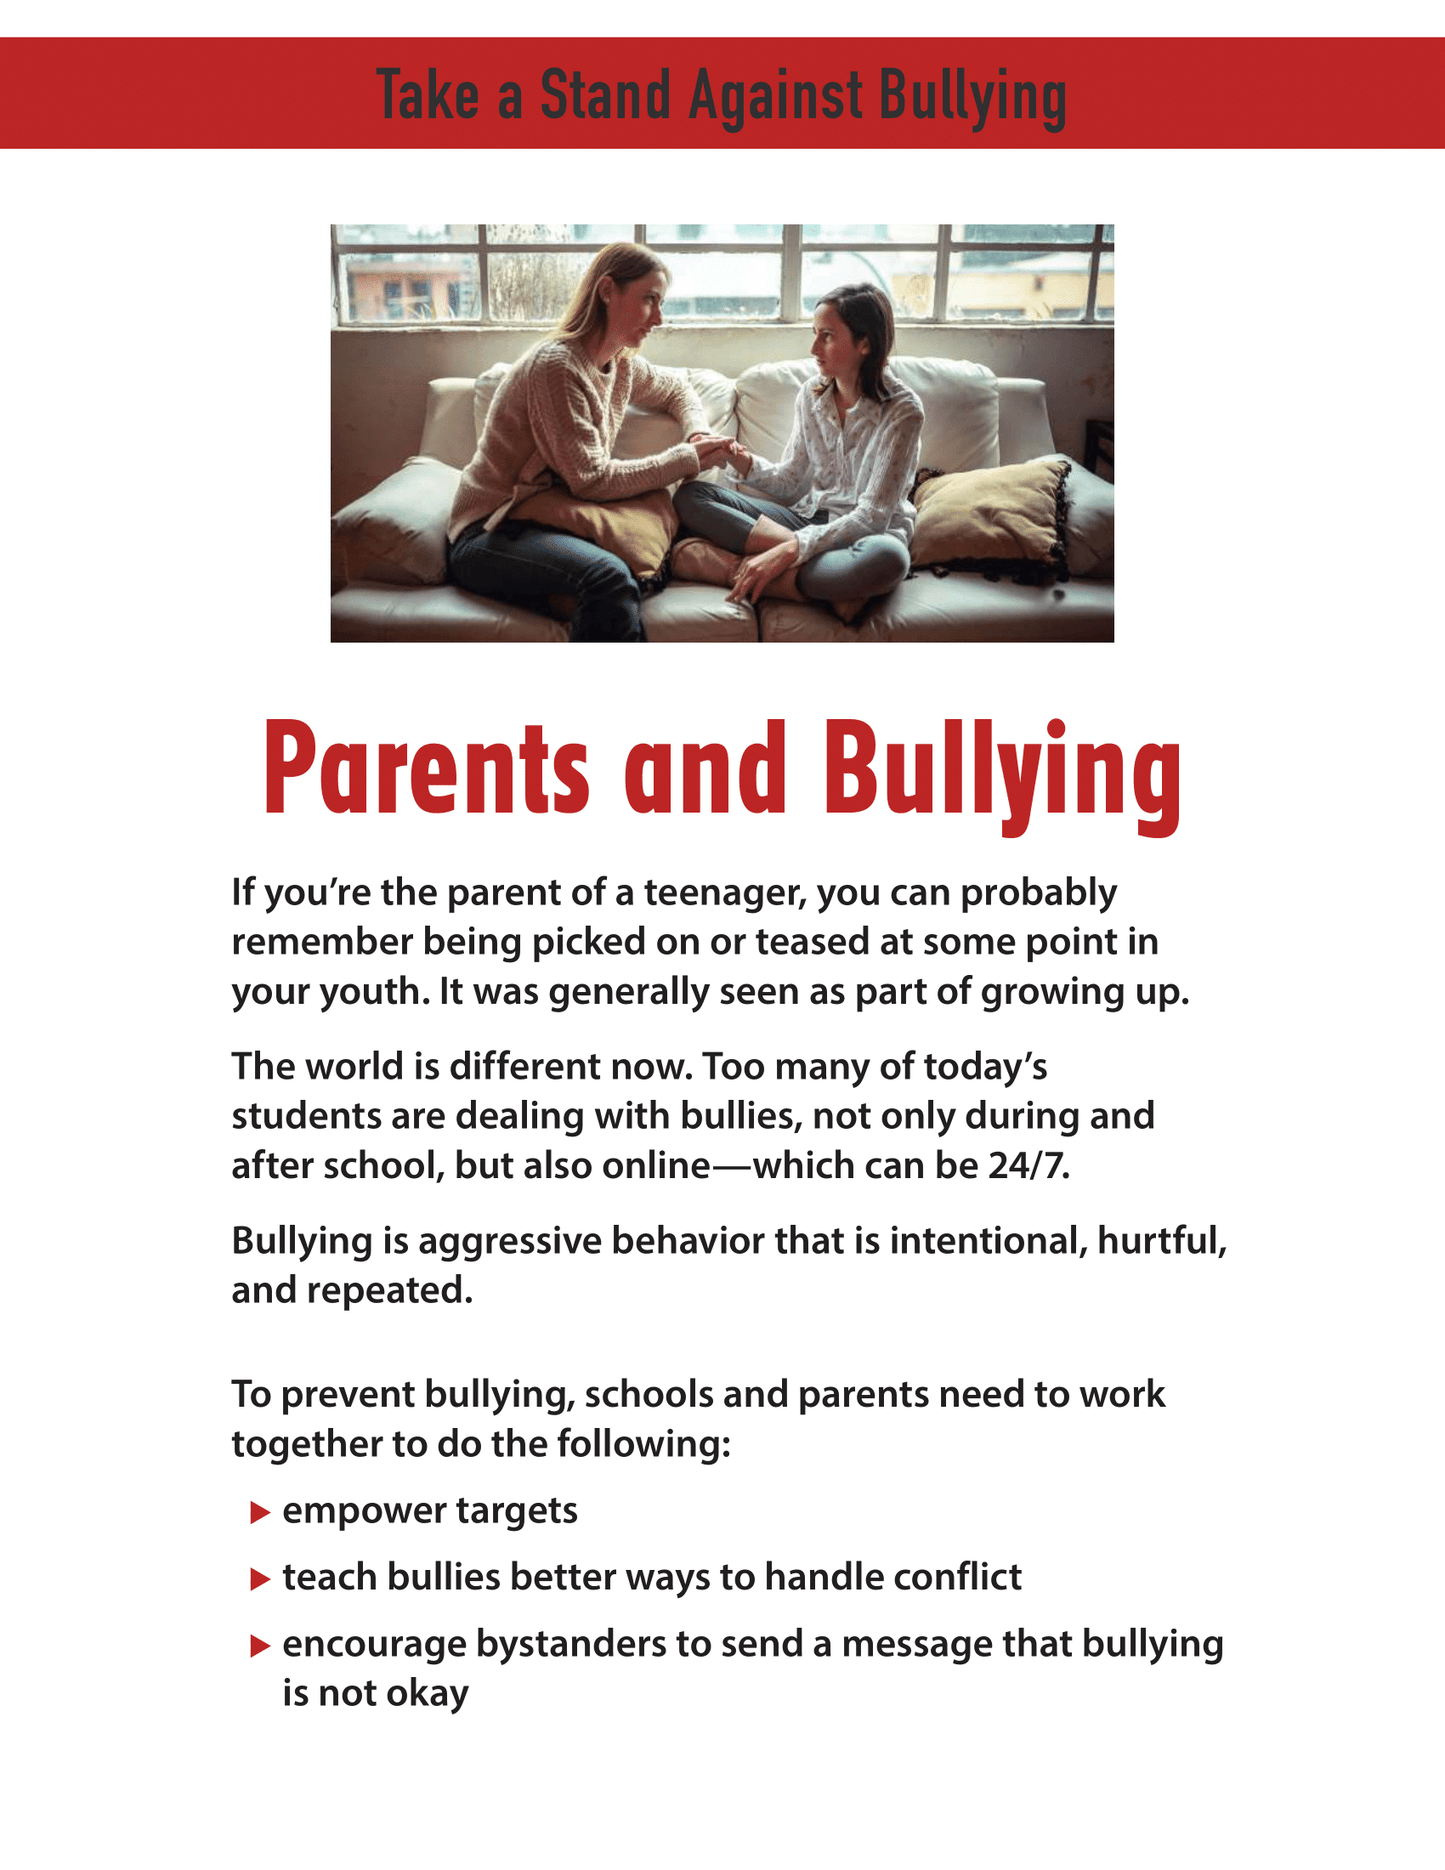 Take a Stand Against Bullying - Parents and Bullying